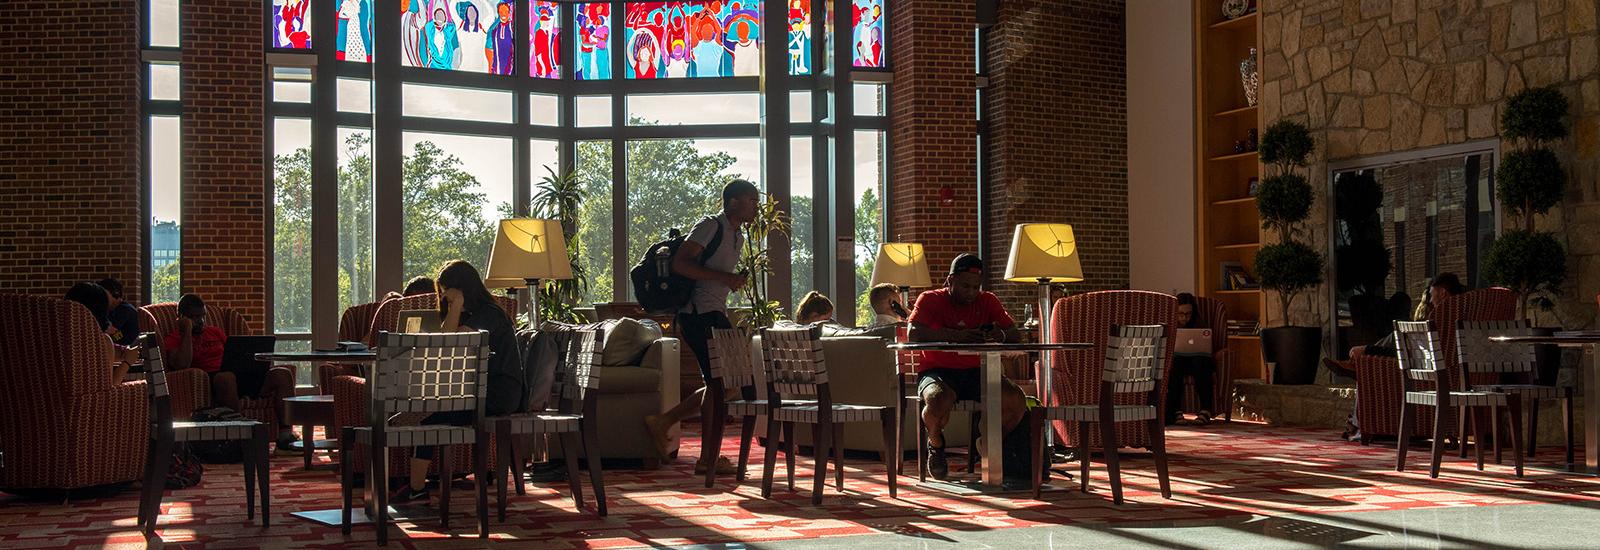 Students studying in dim light at the Ohio Union